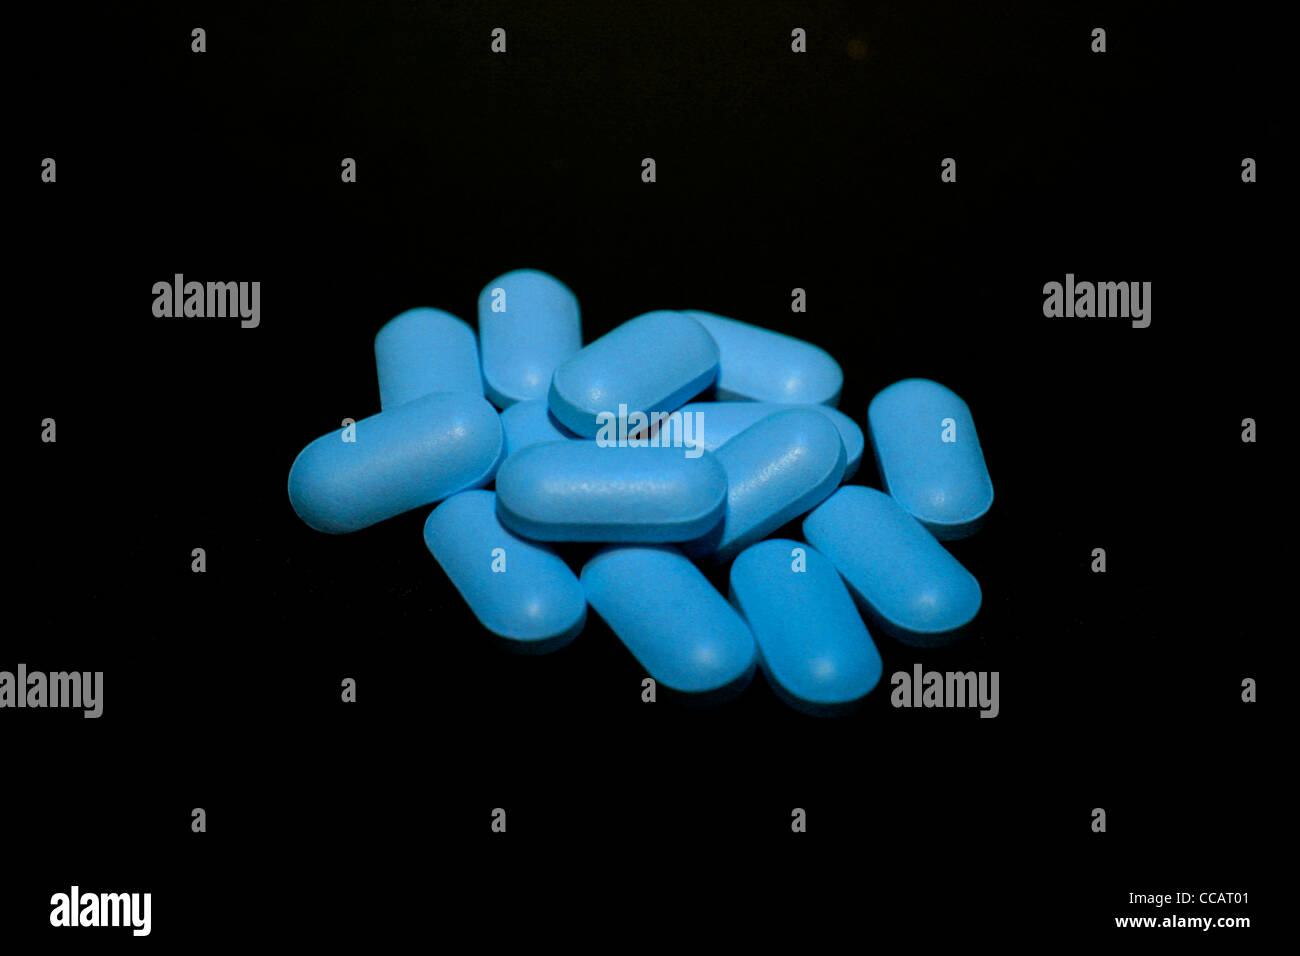 Blue pills over a black background Stock Photo